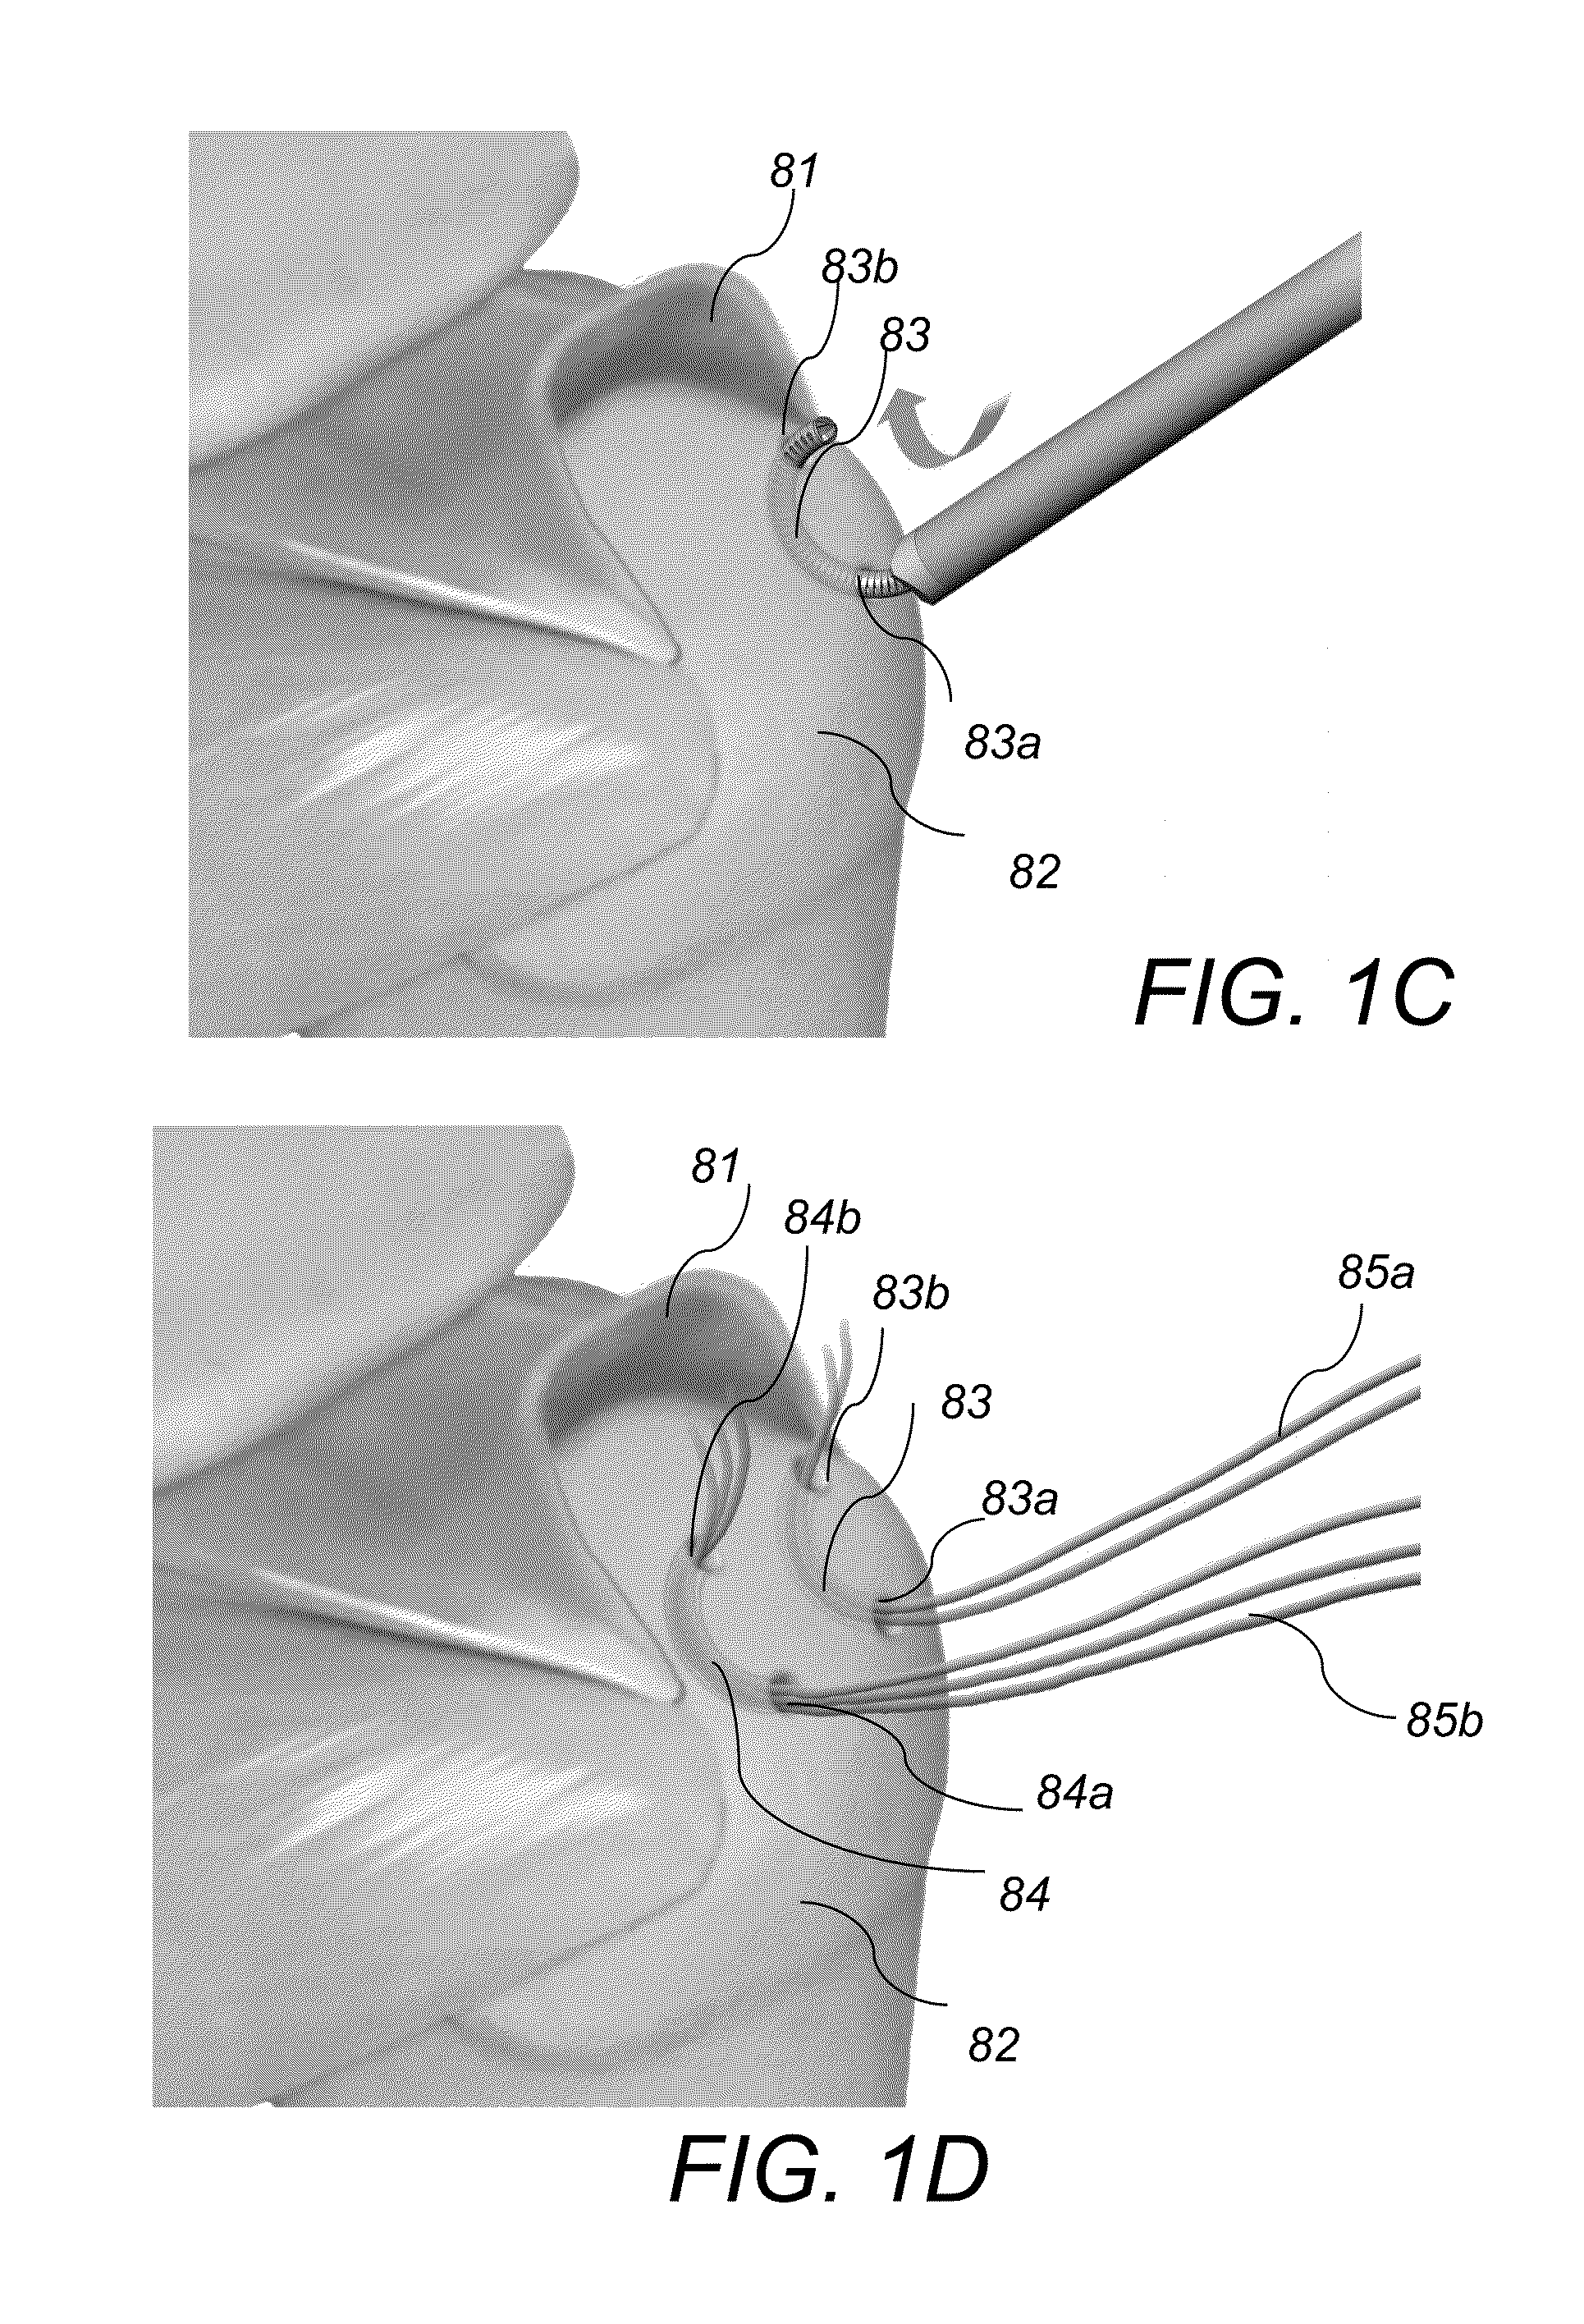 System and method for forming a curved tunnel in bone